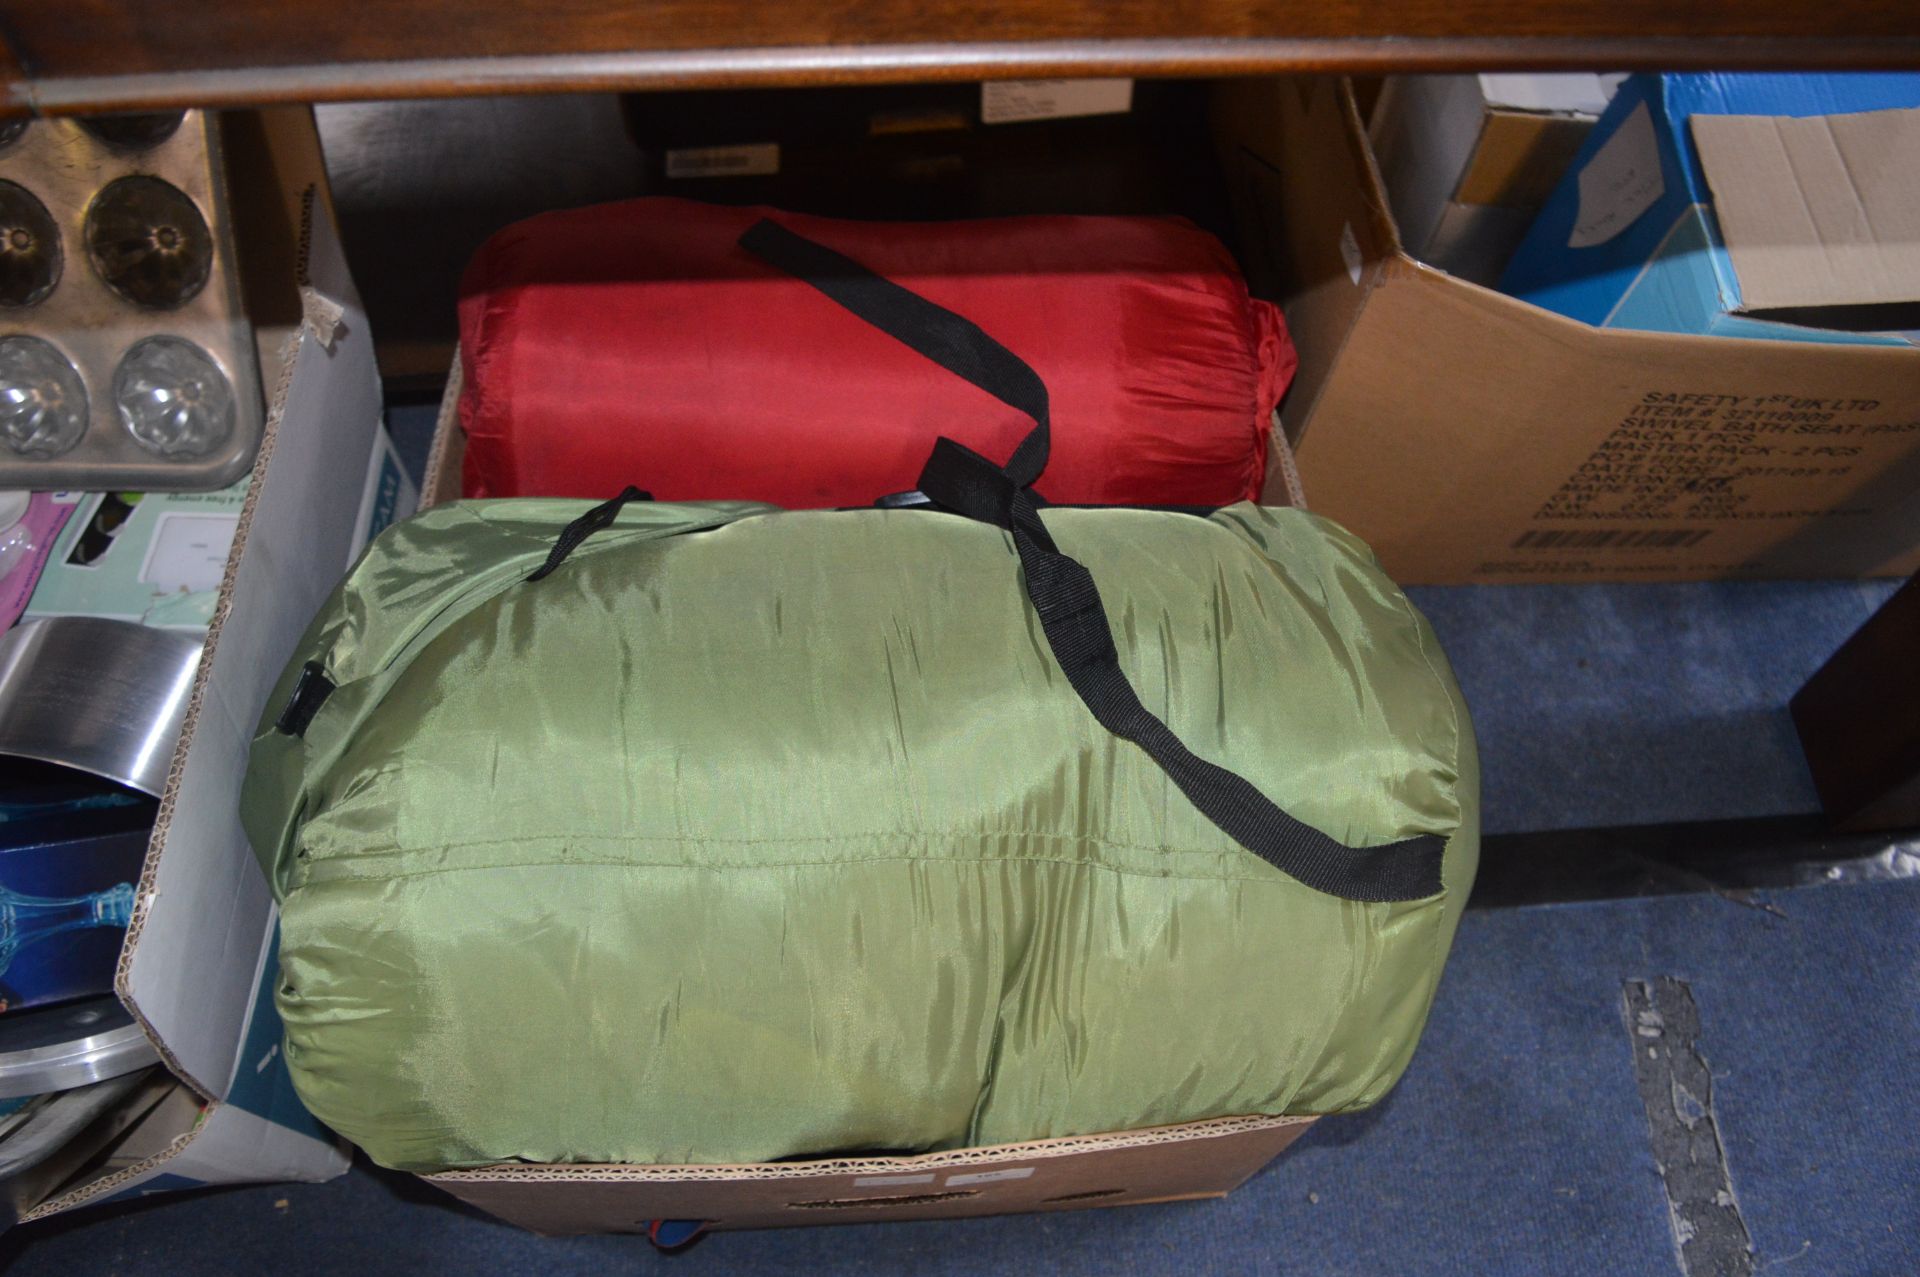 Two Sleeping Bags, Inflatable Bed, etc.